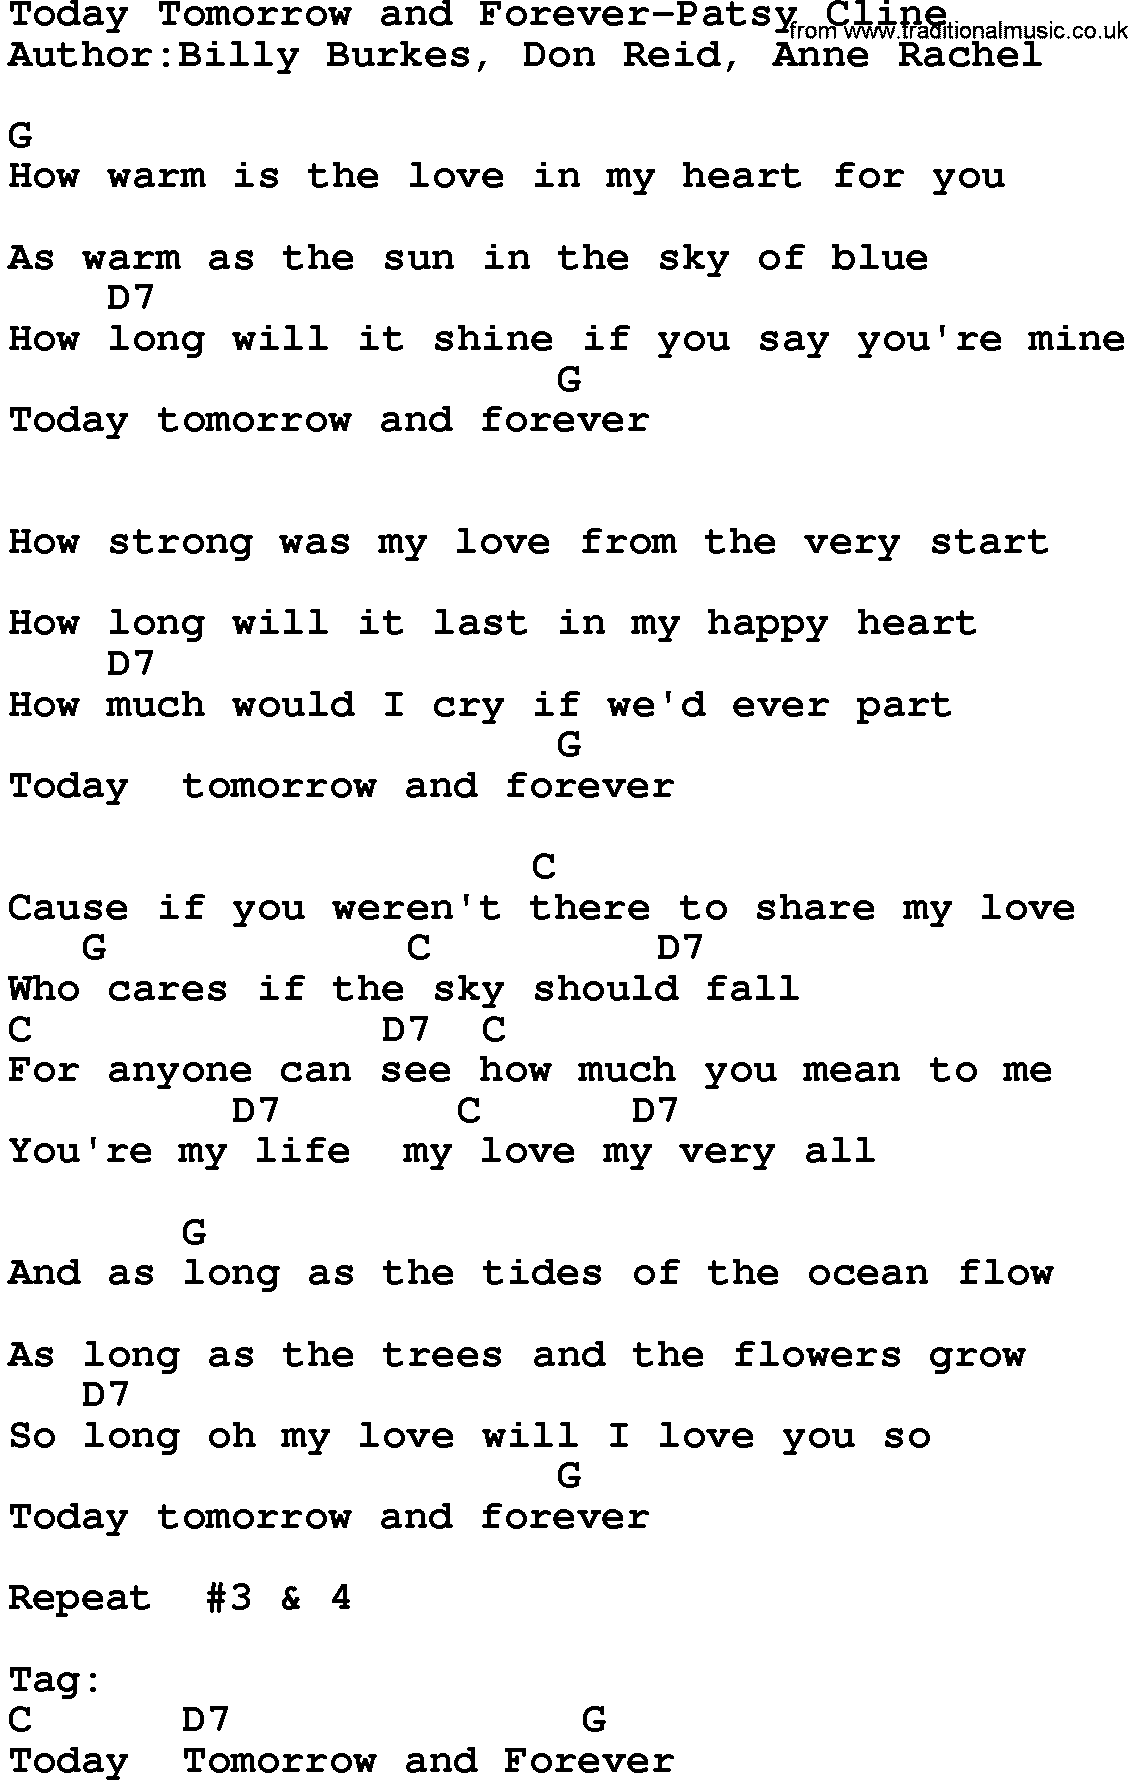 Country music song: Today Tomorrow And Forever-Patsy Cline lyrics and chords